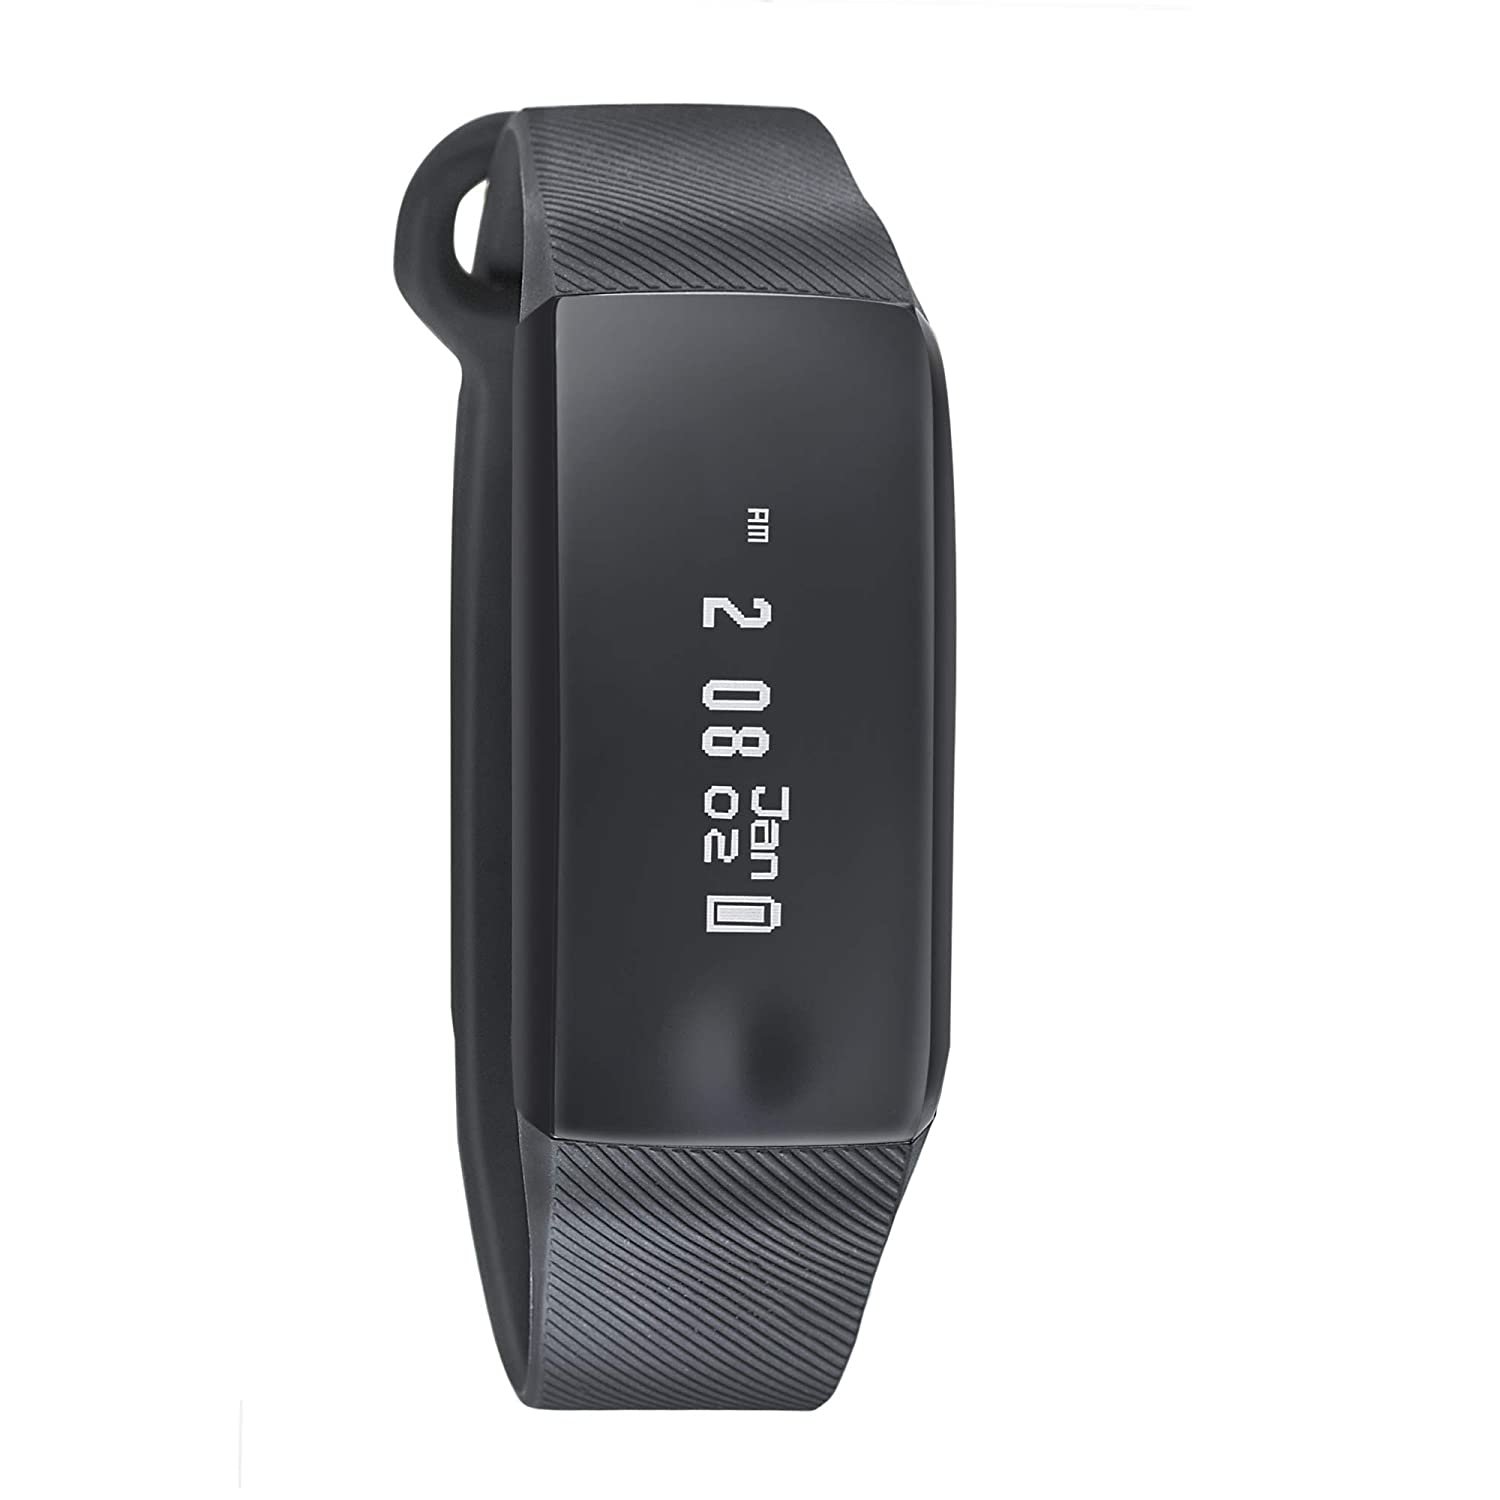 Fastrack reflex beat Uni-sex activity tracker - Heart rate monitor ,Calorie counter, Call and message notifications and up to 5 Day battery Life